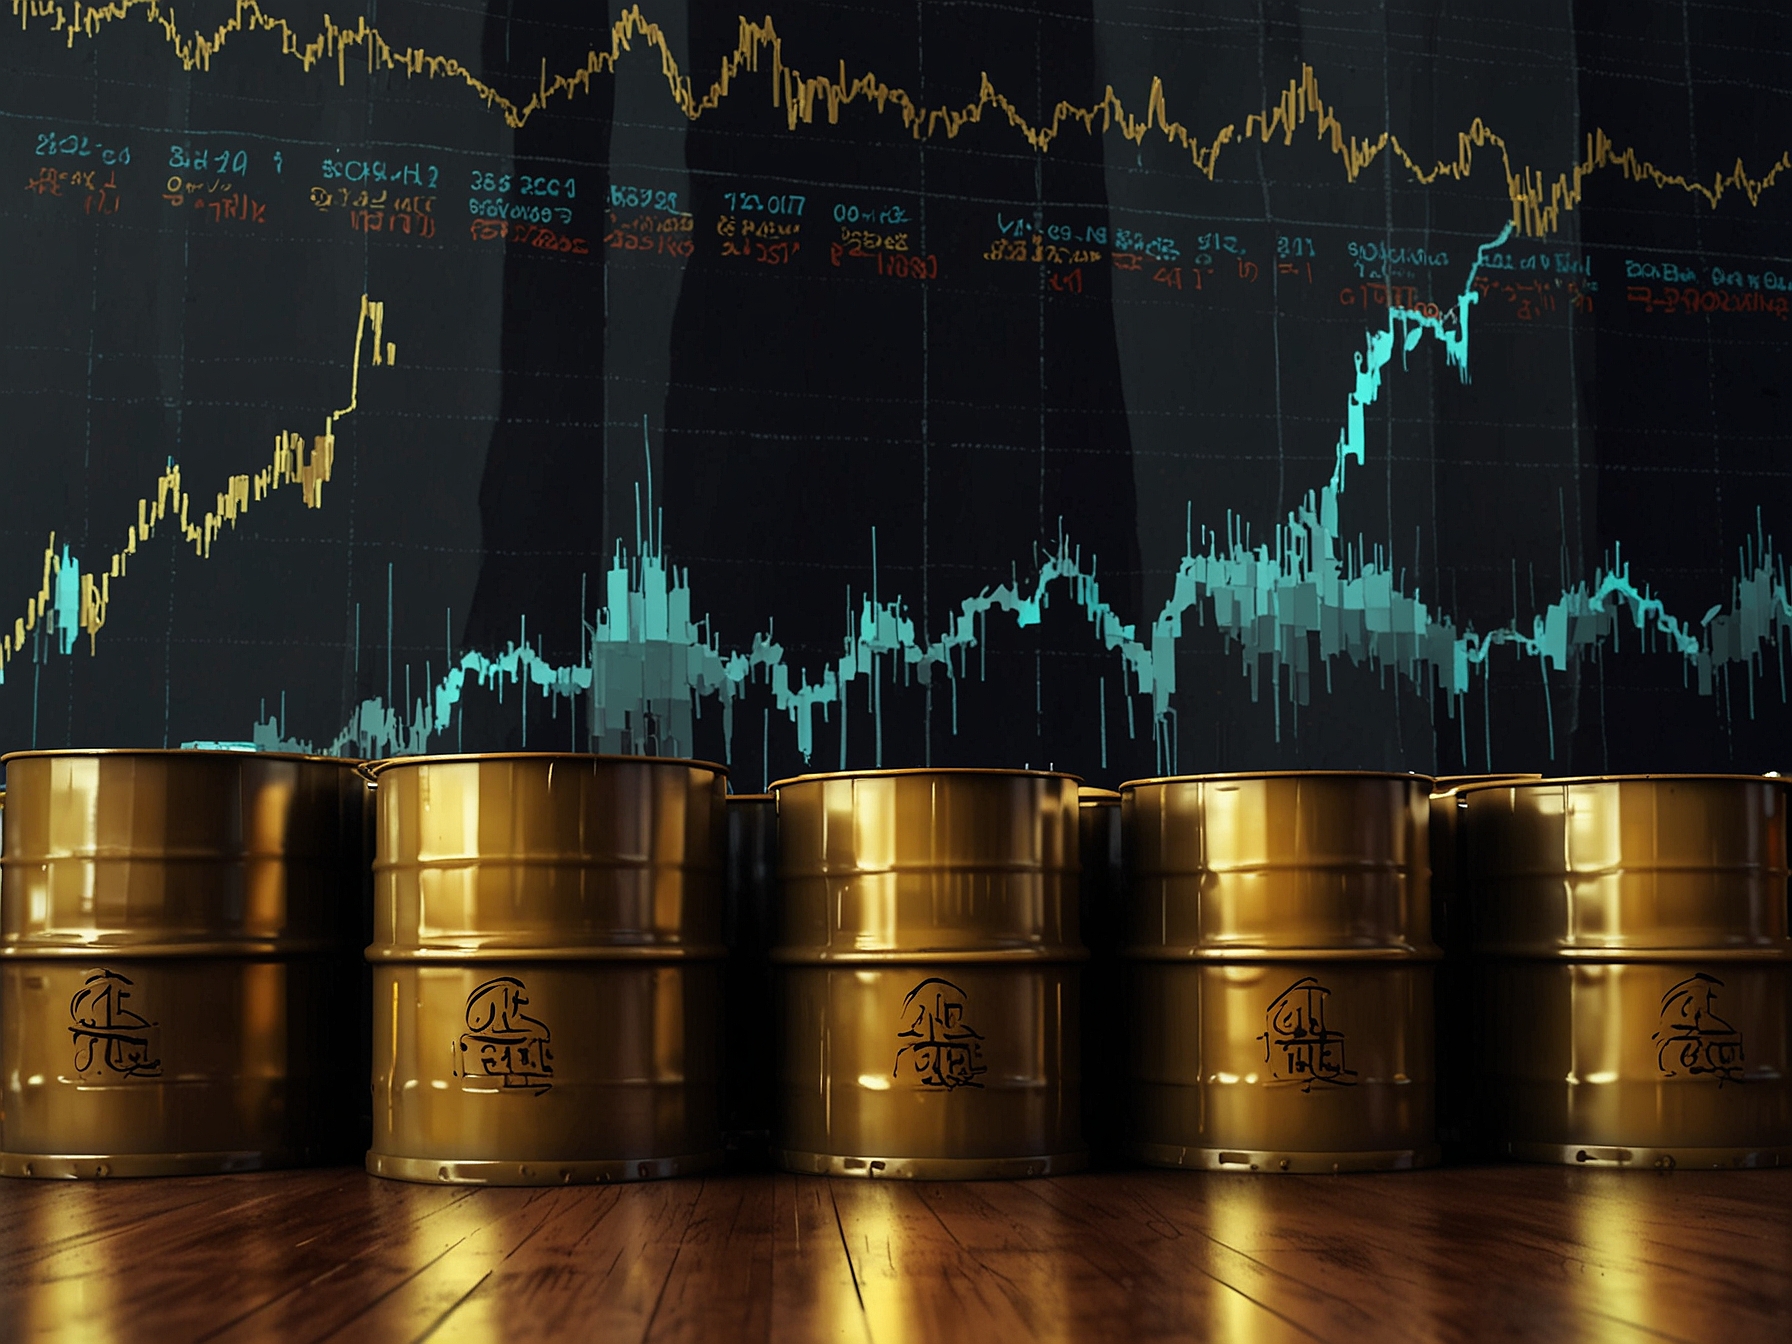 Oil barrels stored at a distribution site with a backdrop of financial data screens, indicating the impact of economic indicators and central bank policies on oil prices.